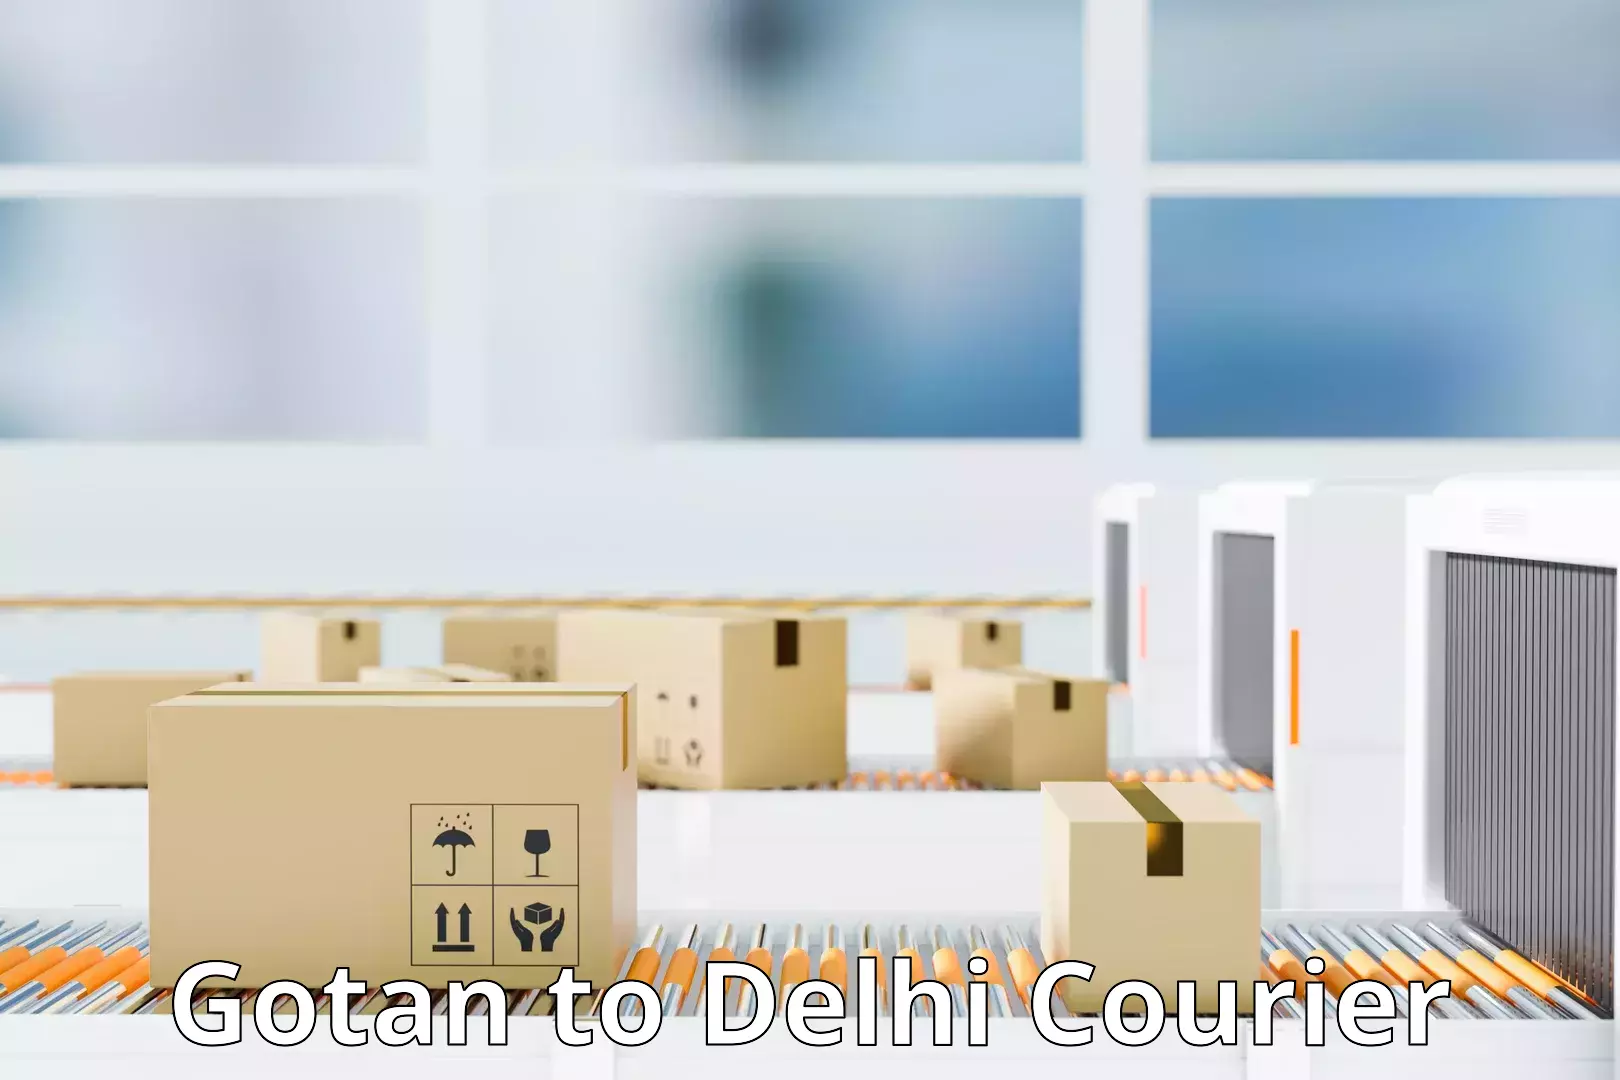 Package delivery network Gotan to East Delhi